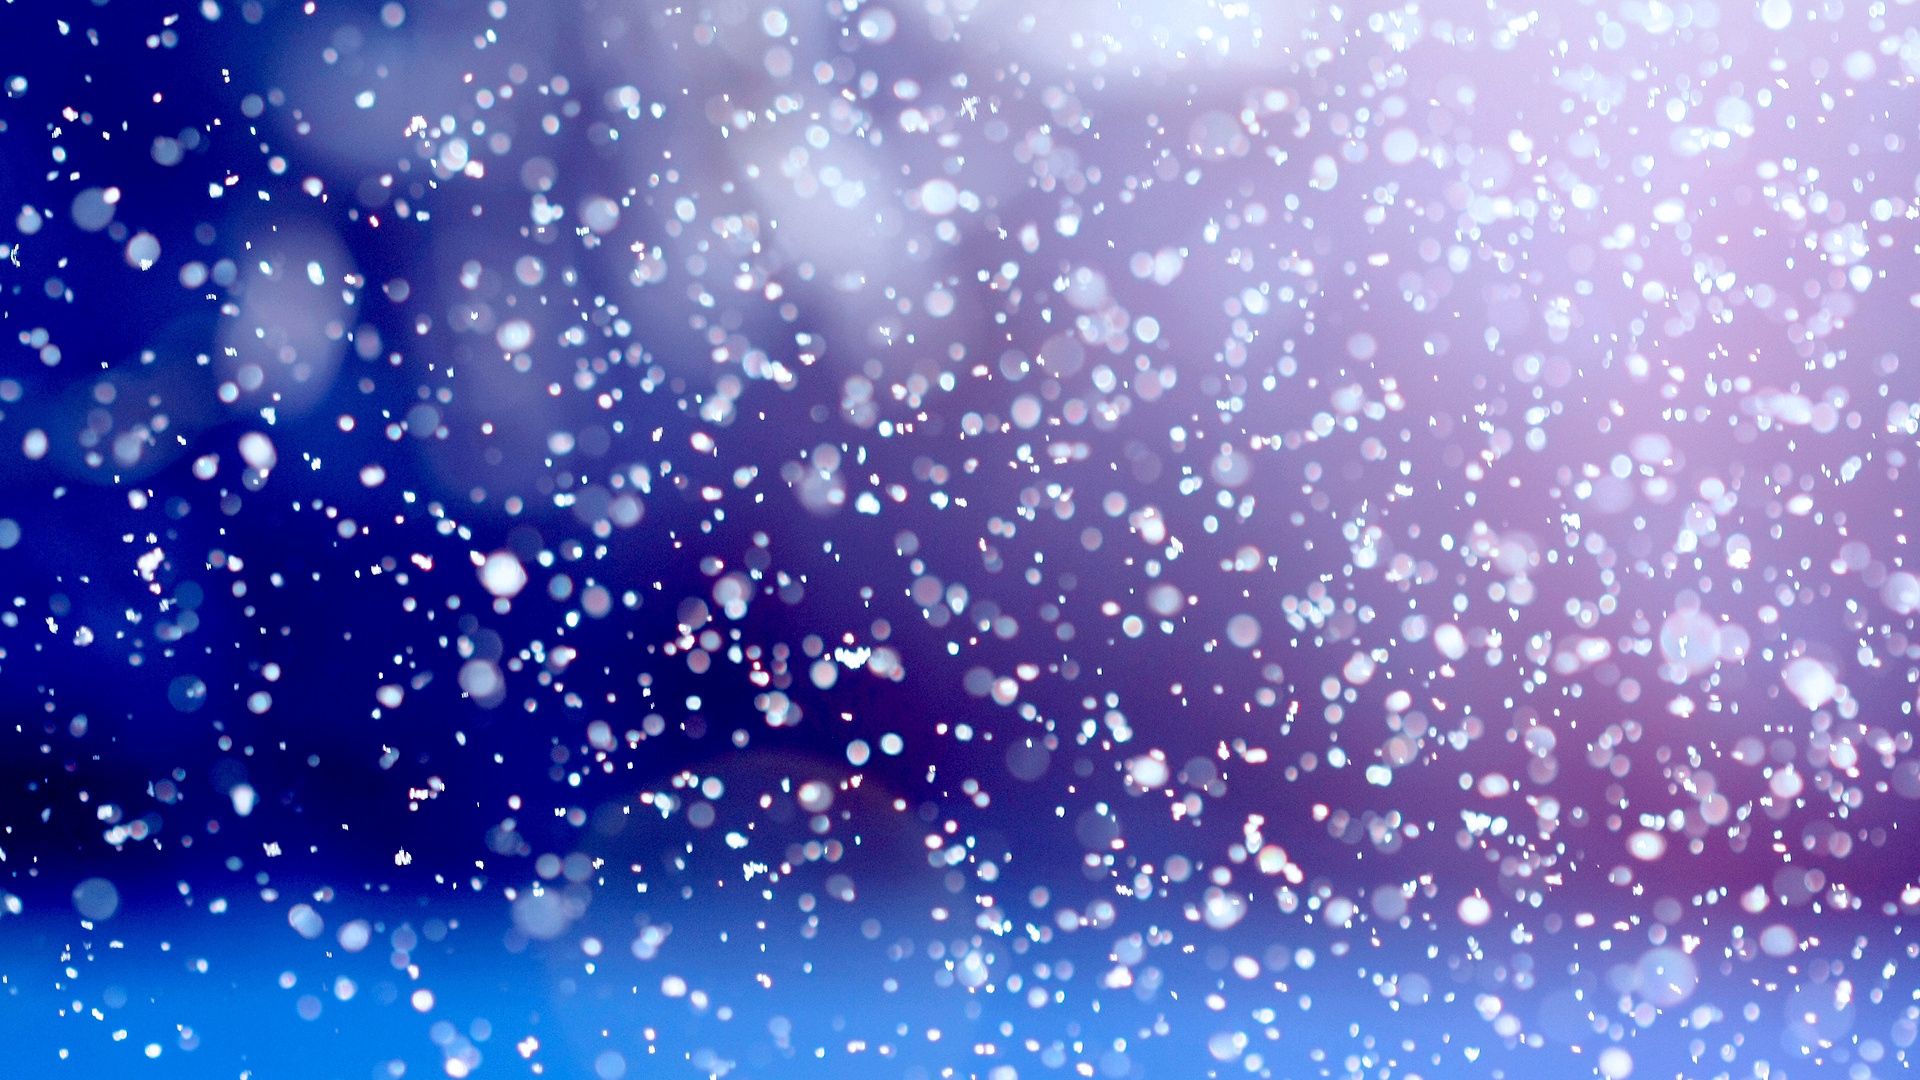 weather, abstract, lilac, snow, blue, june